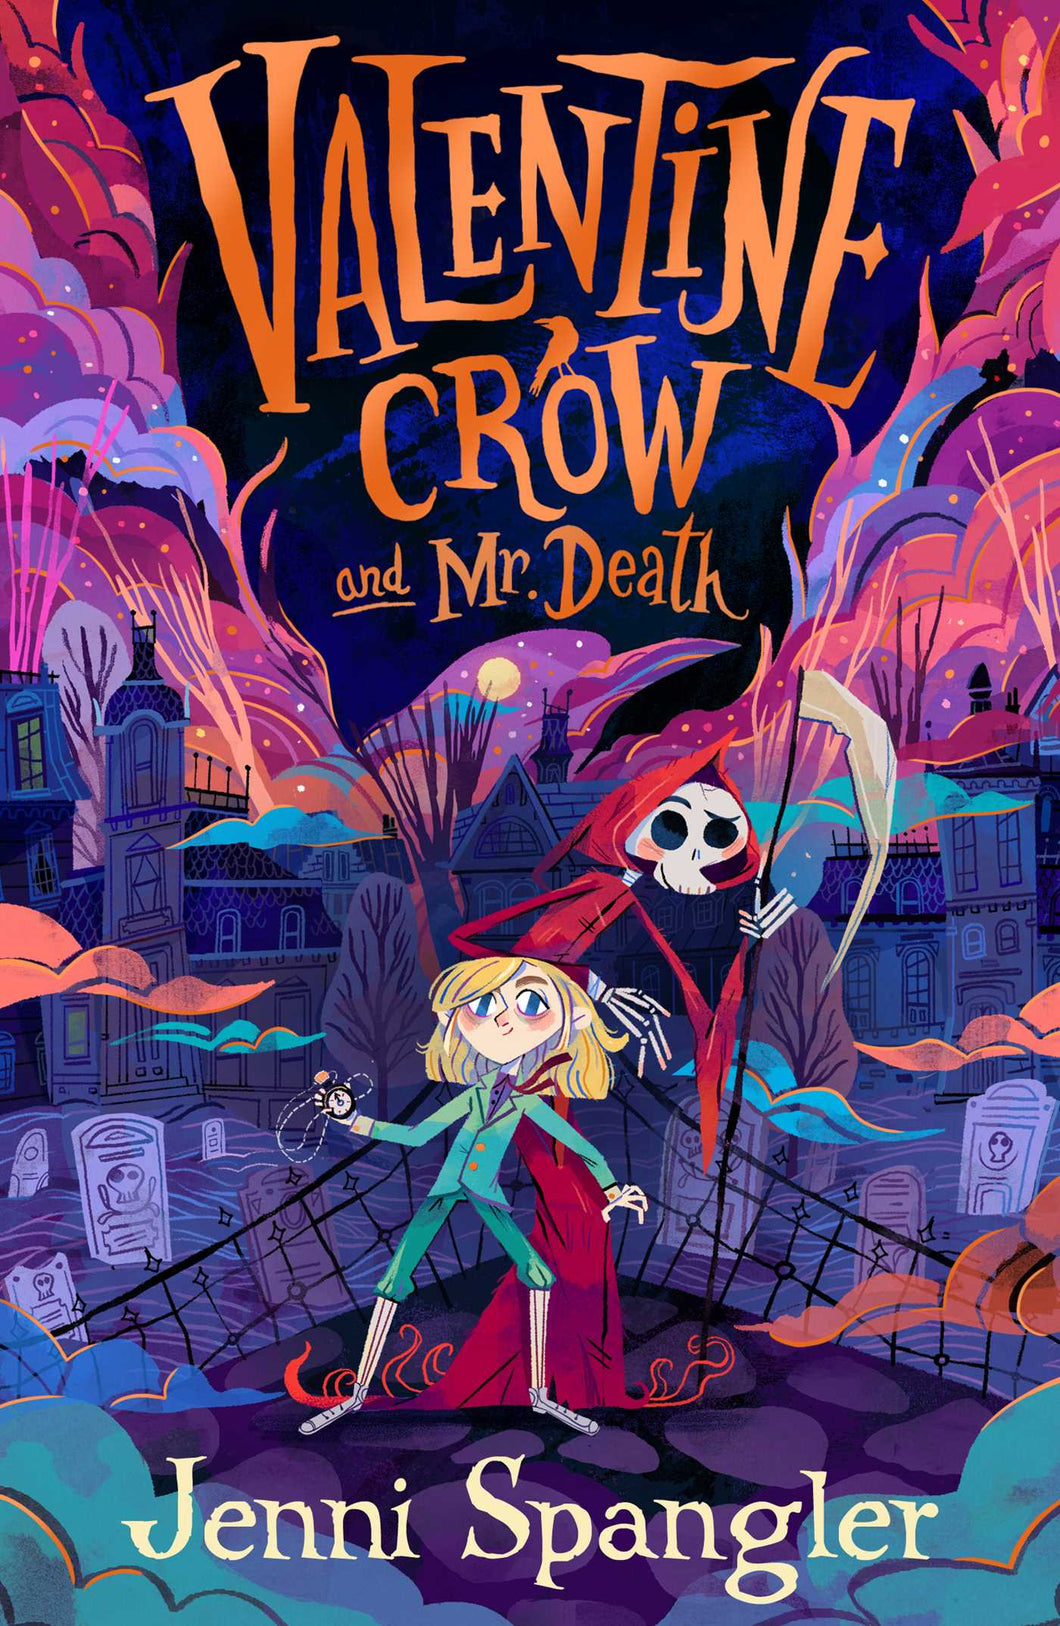 Valentine Crow and Mr. Death by Jenni Spangler